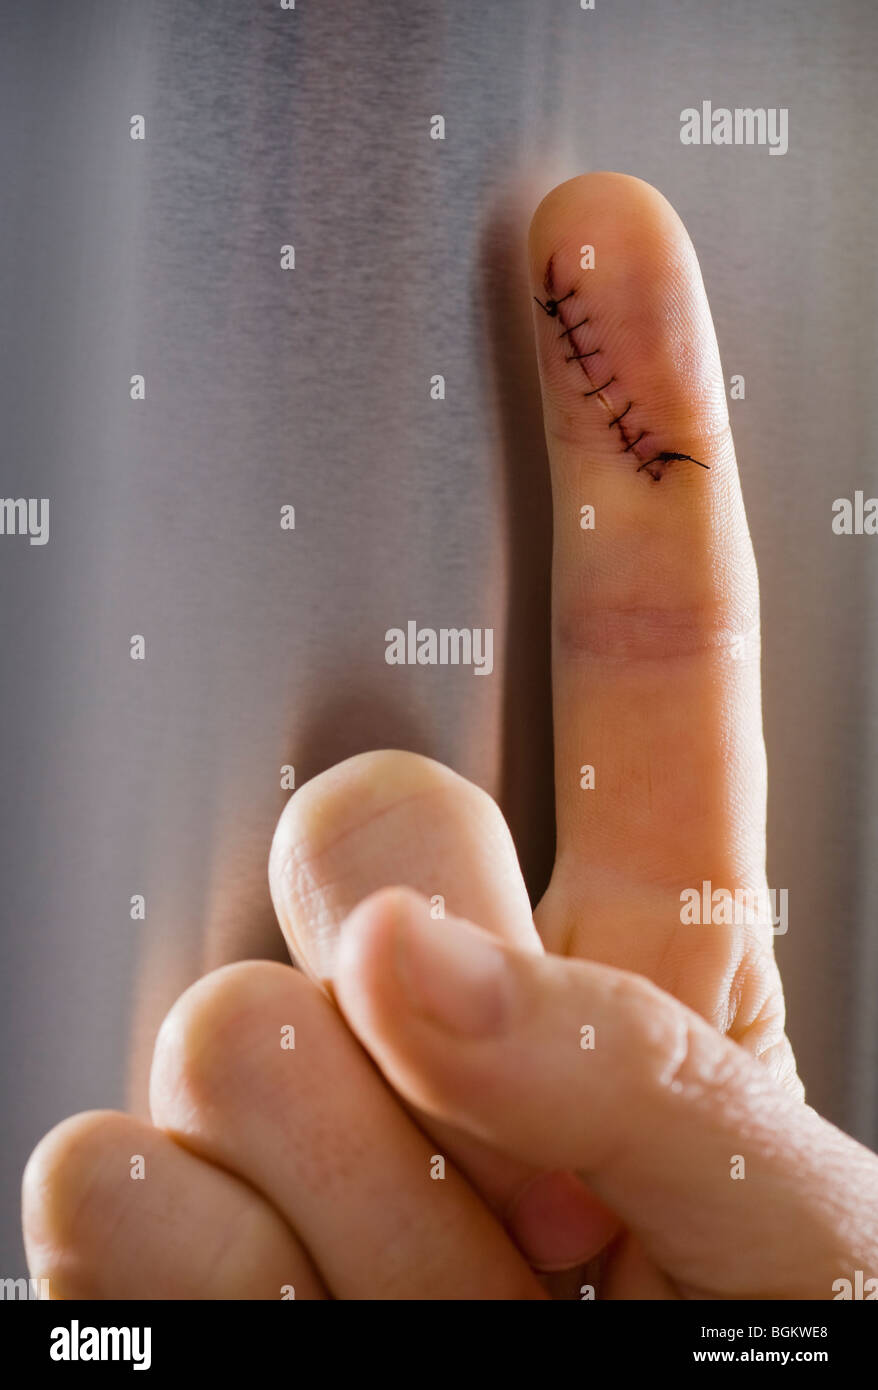 Closeup of an extended index finger with a cut and seven stitches in it. Stock Photo